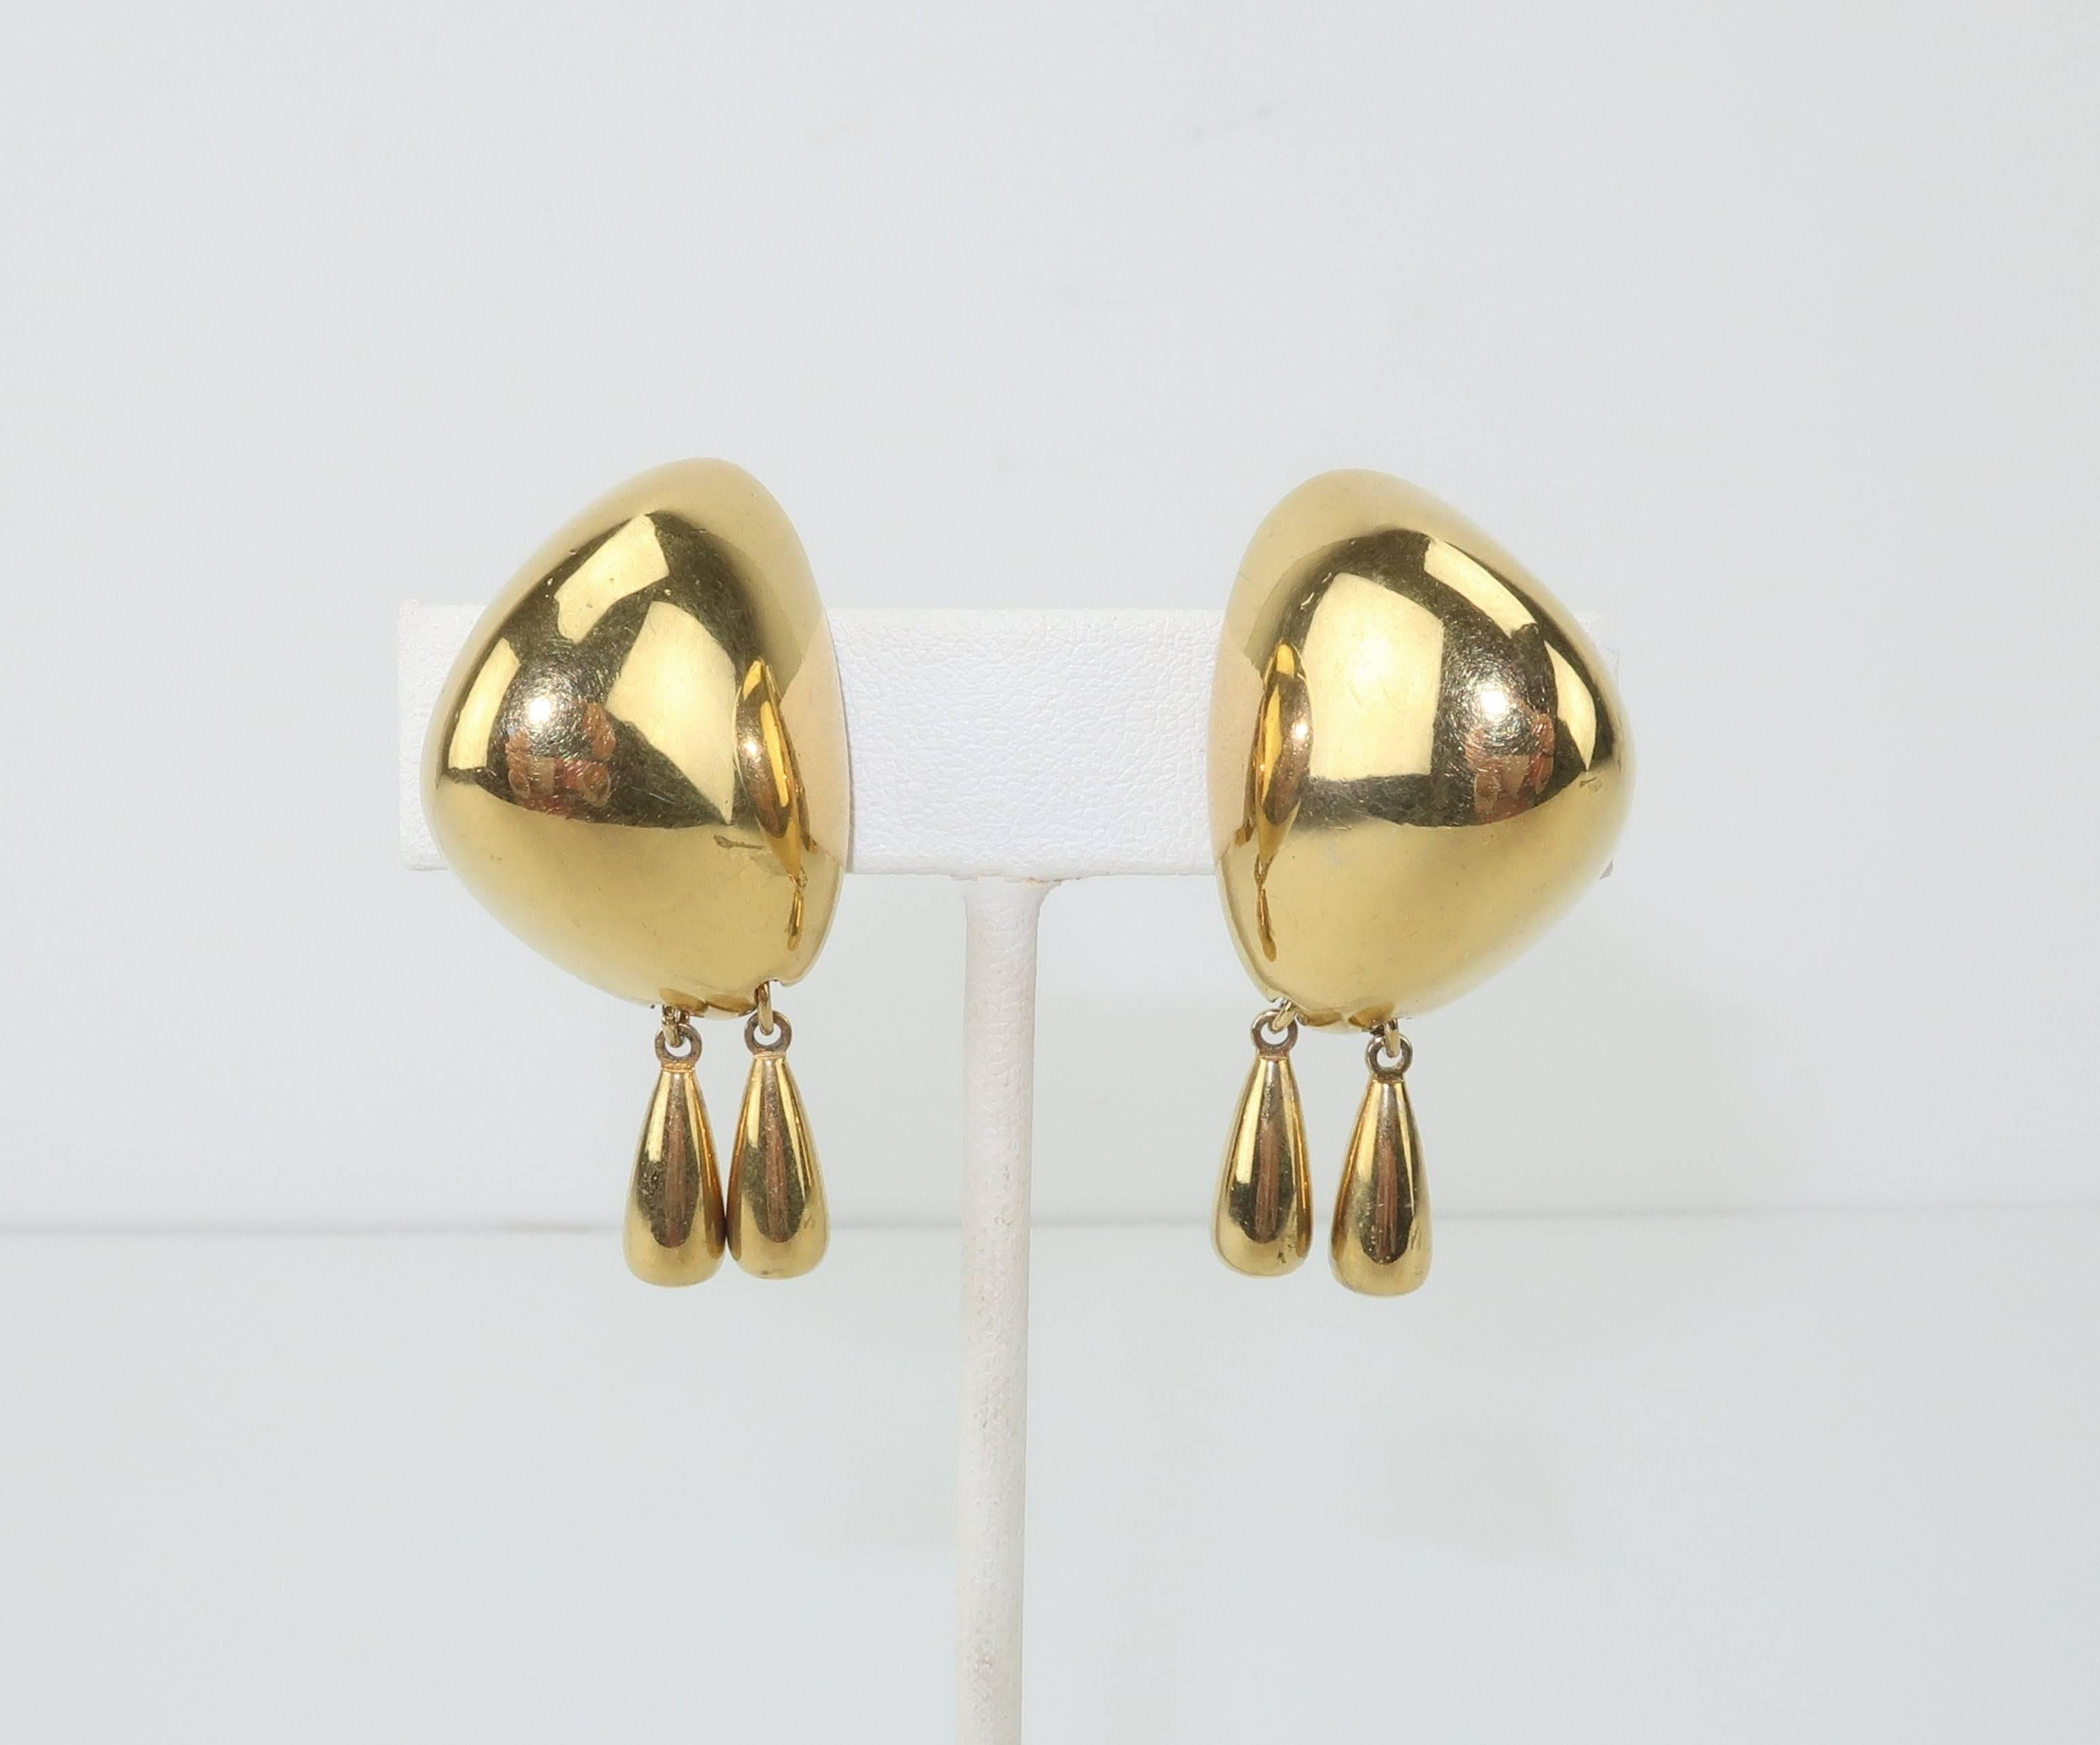 The modernist silhouette of these stylish Liz Claiborne earrings are a testament to good design.  The boulder shaped domed body of the gold tone clip on base suspends two dangles providing movement and a look equally at home with casual or